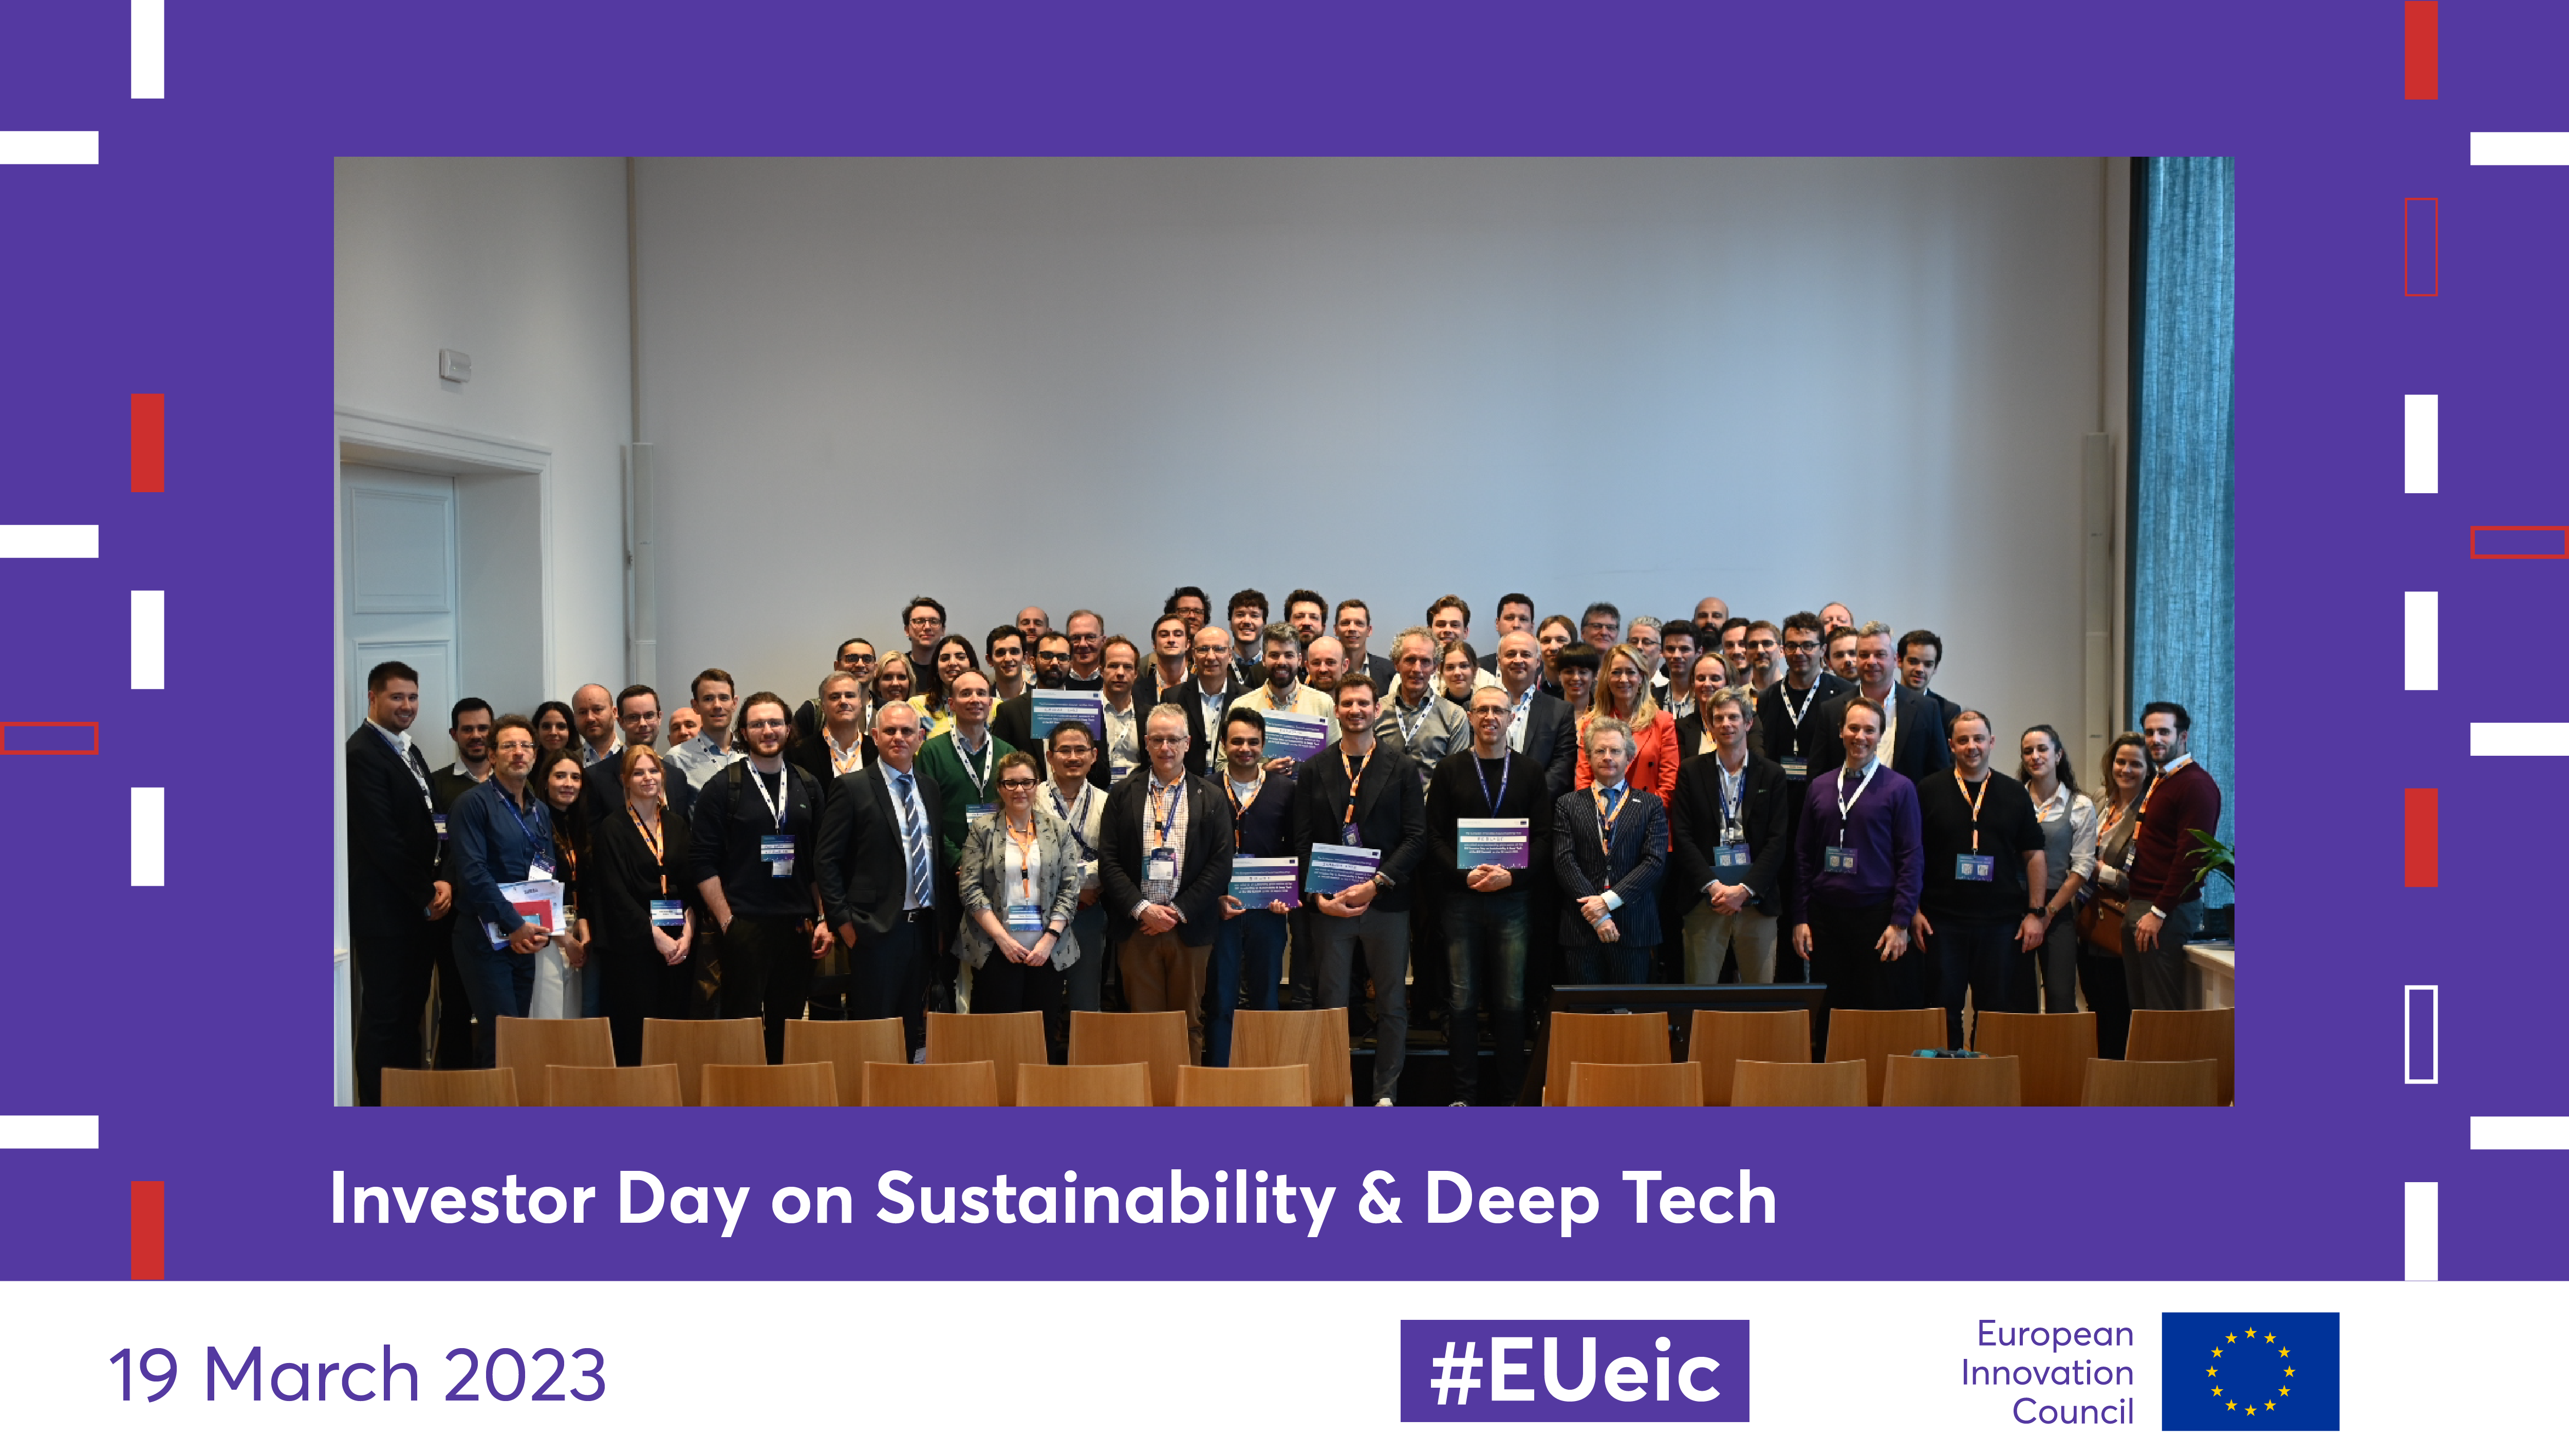 Investors, company representatives and staff members pose in a family photo at the Investor Day on Sustainability & Deep Tech